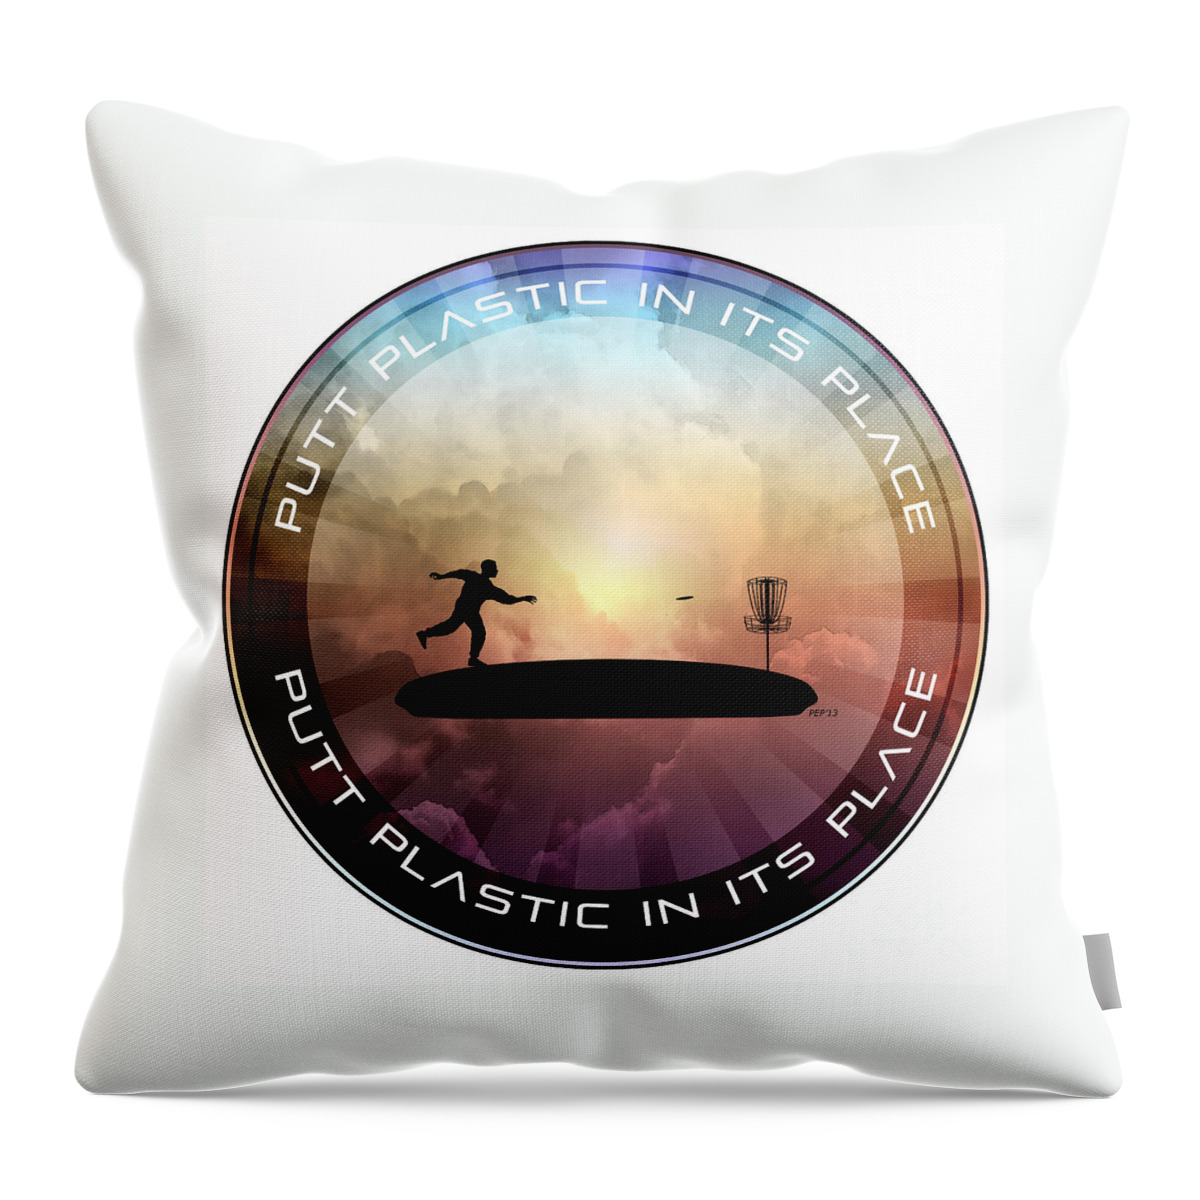 Graphic Design Throw Pillow featuring the digital art Putt Plastic In Its Place by Phil Perkins